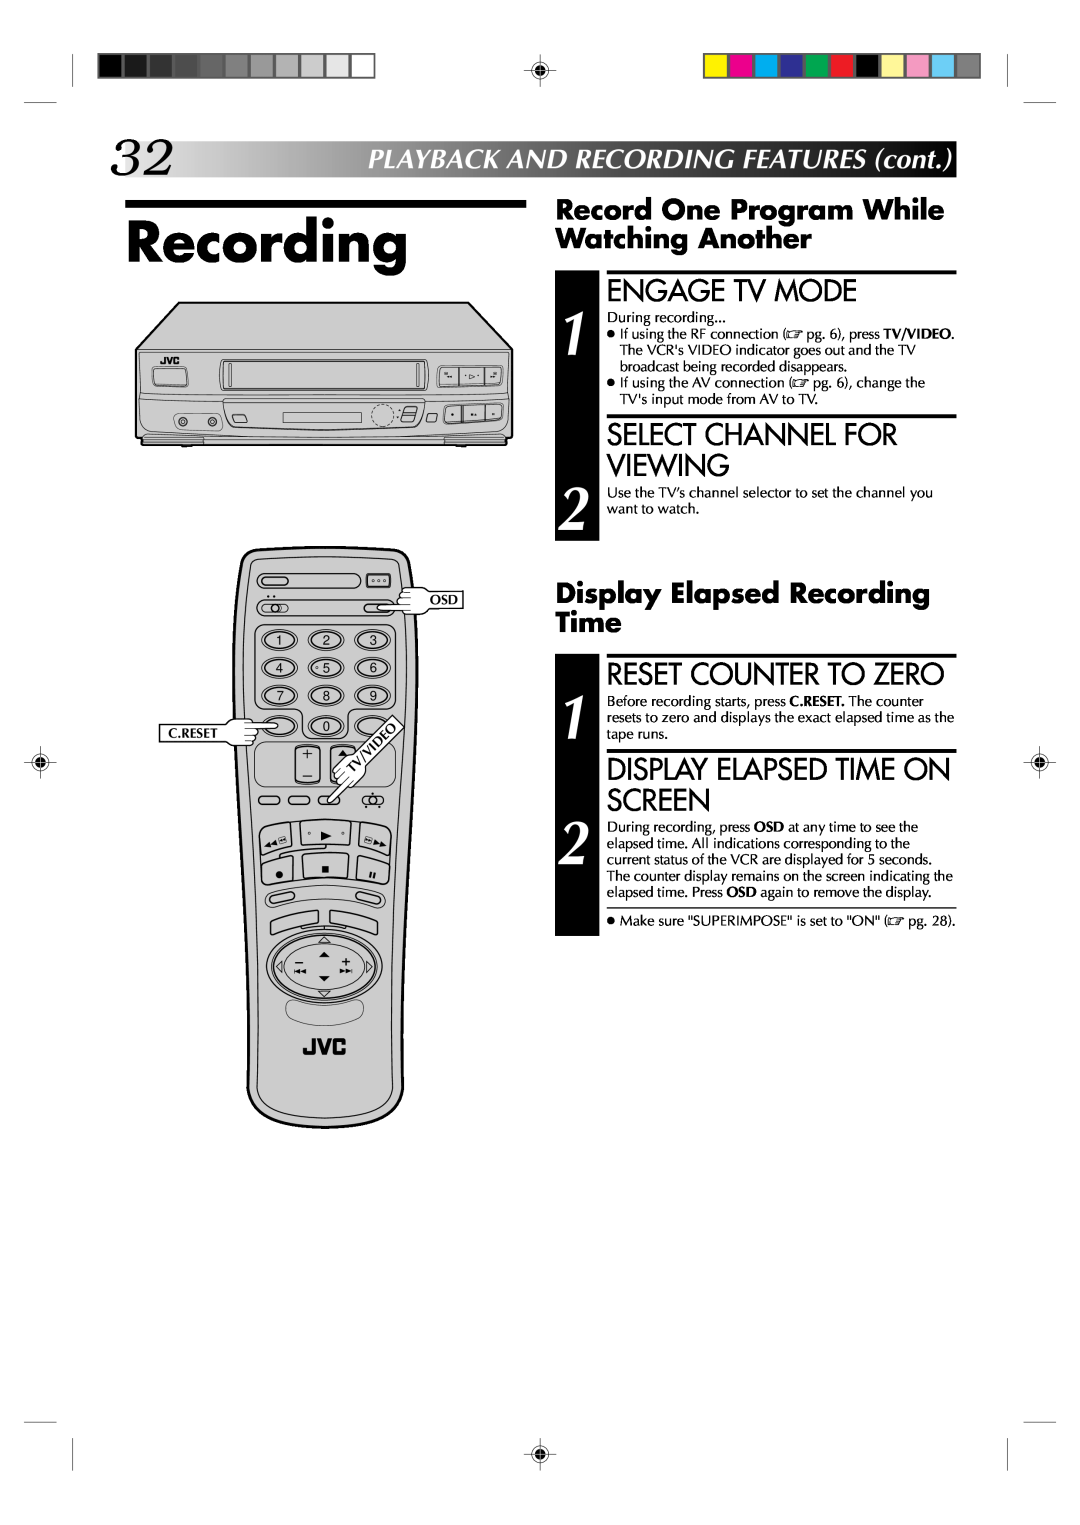 JVC HR-VP434U Recording, Engage Tv Mode, Select Channel For Viewing, Display Elapsed Time On Screen, Reset Counter To Zero 